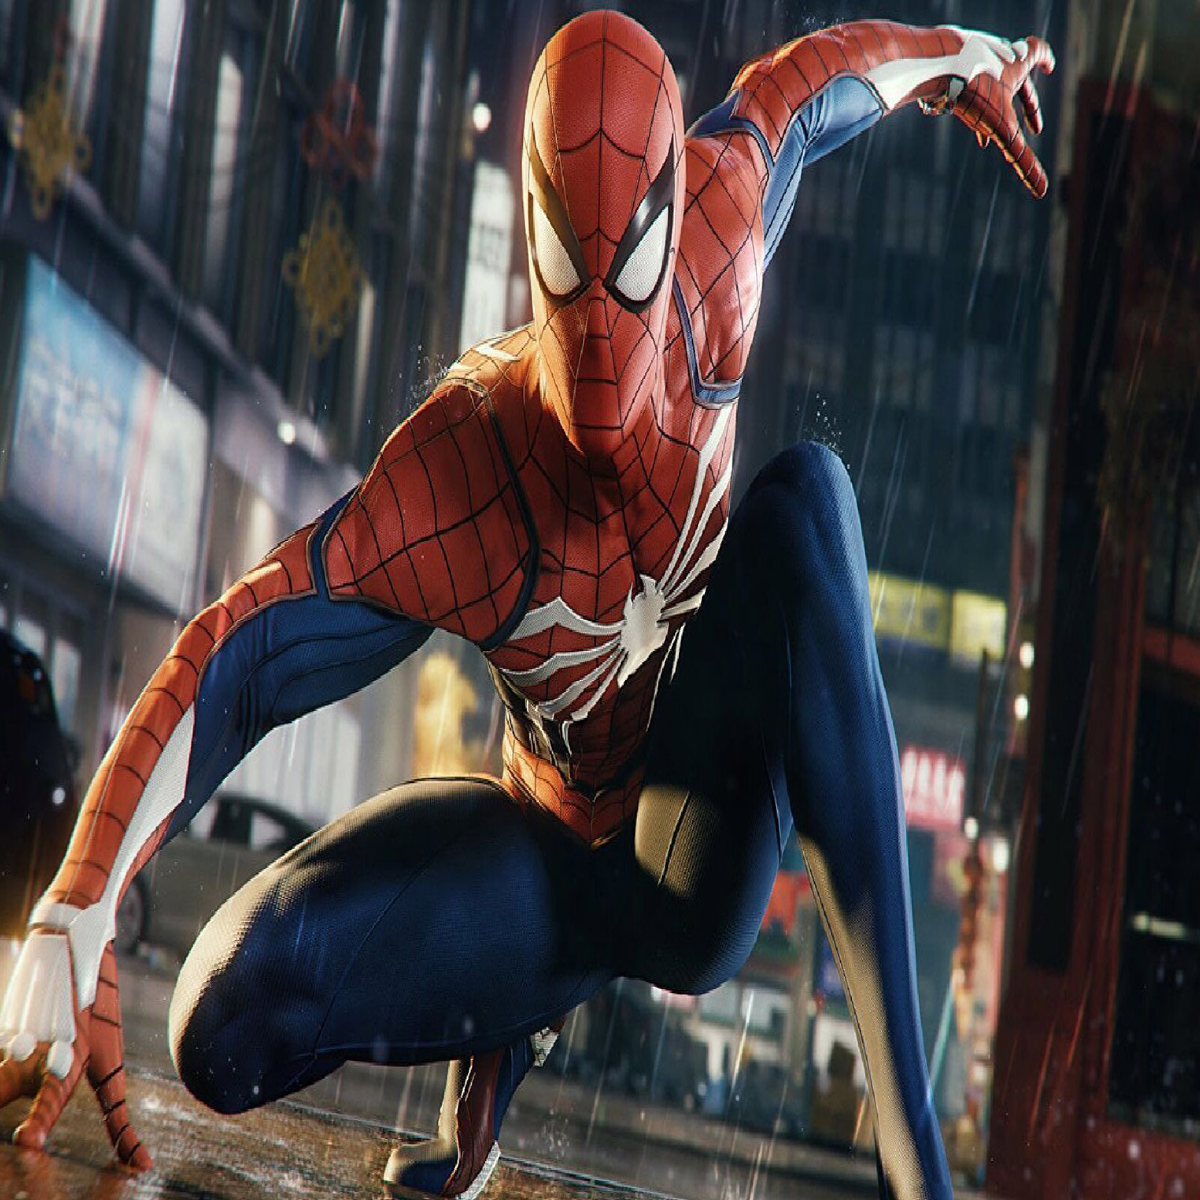 SPIDER-MAN REMASTERED (PC, PS5) VALE A PENA? ANÁLISE - REVIEW 